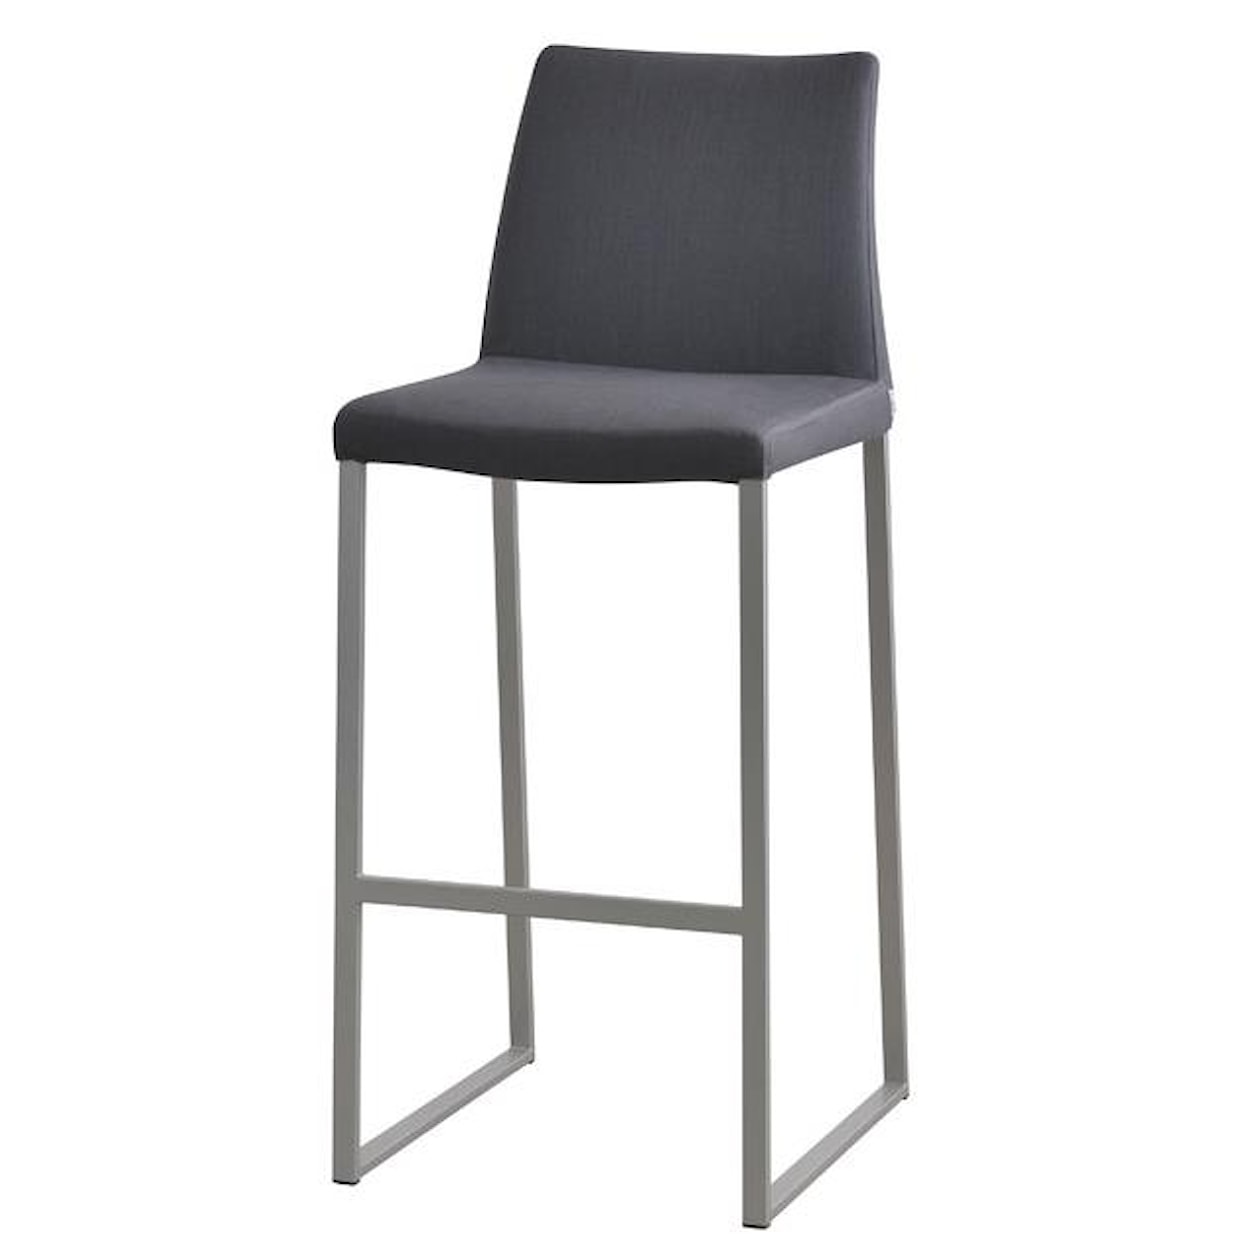 Trica Contemporary Seating Curvo Counter Stool